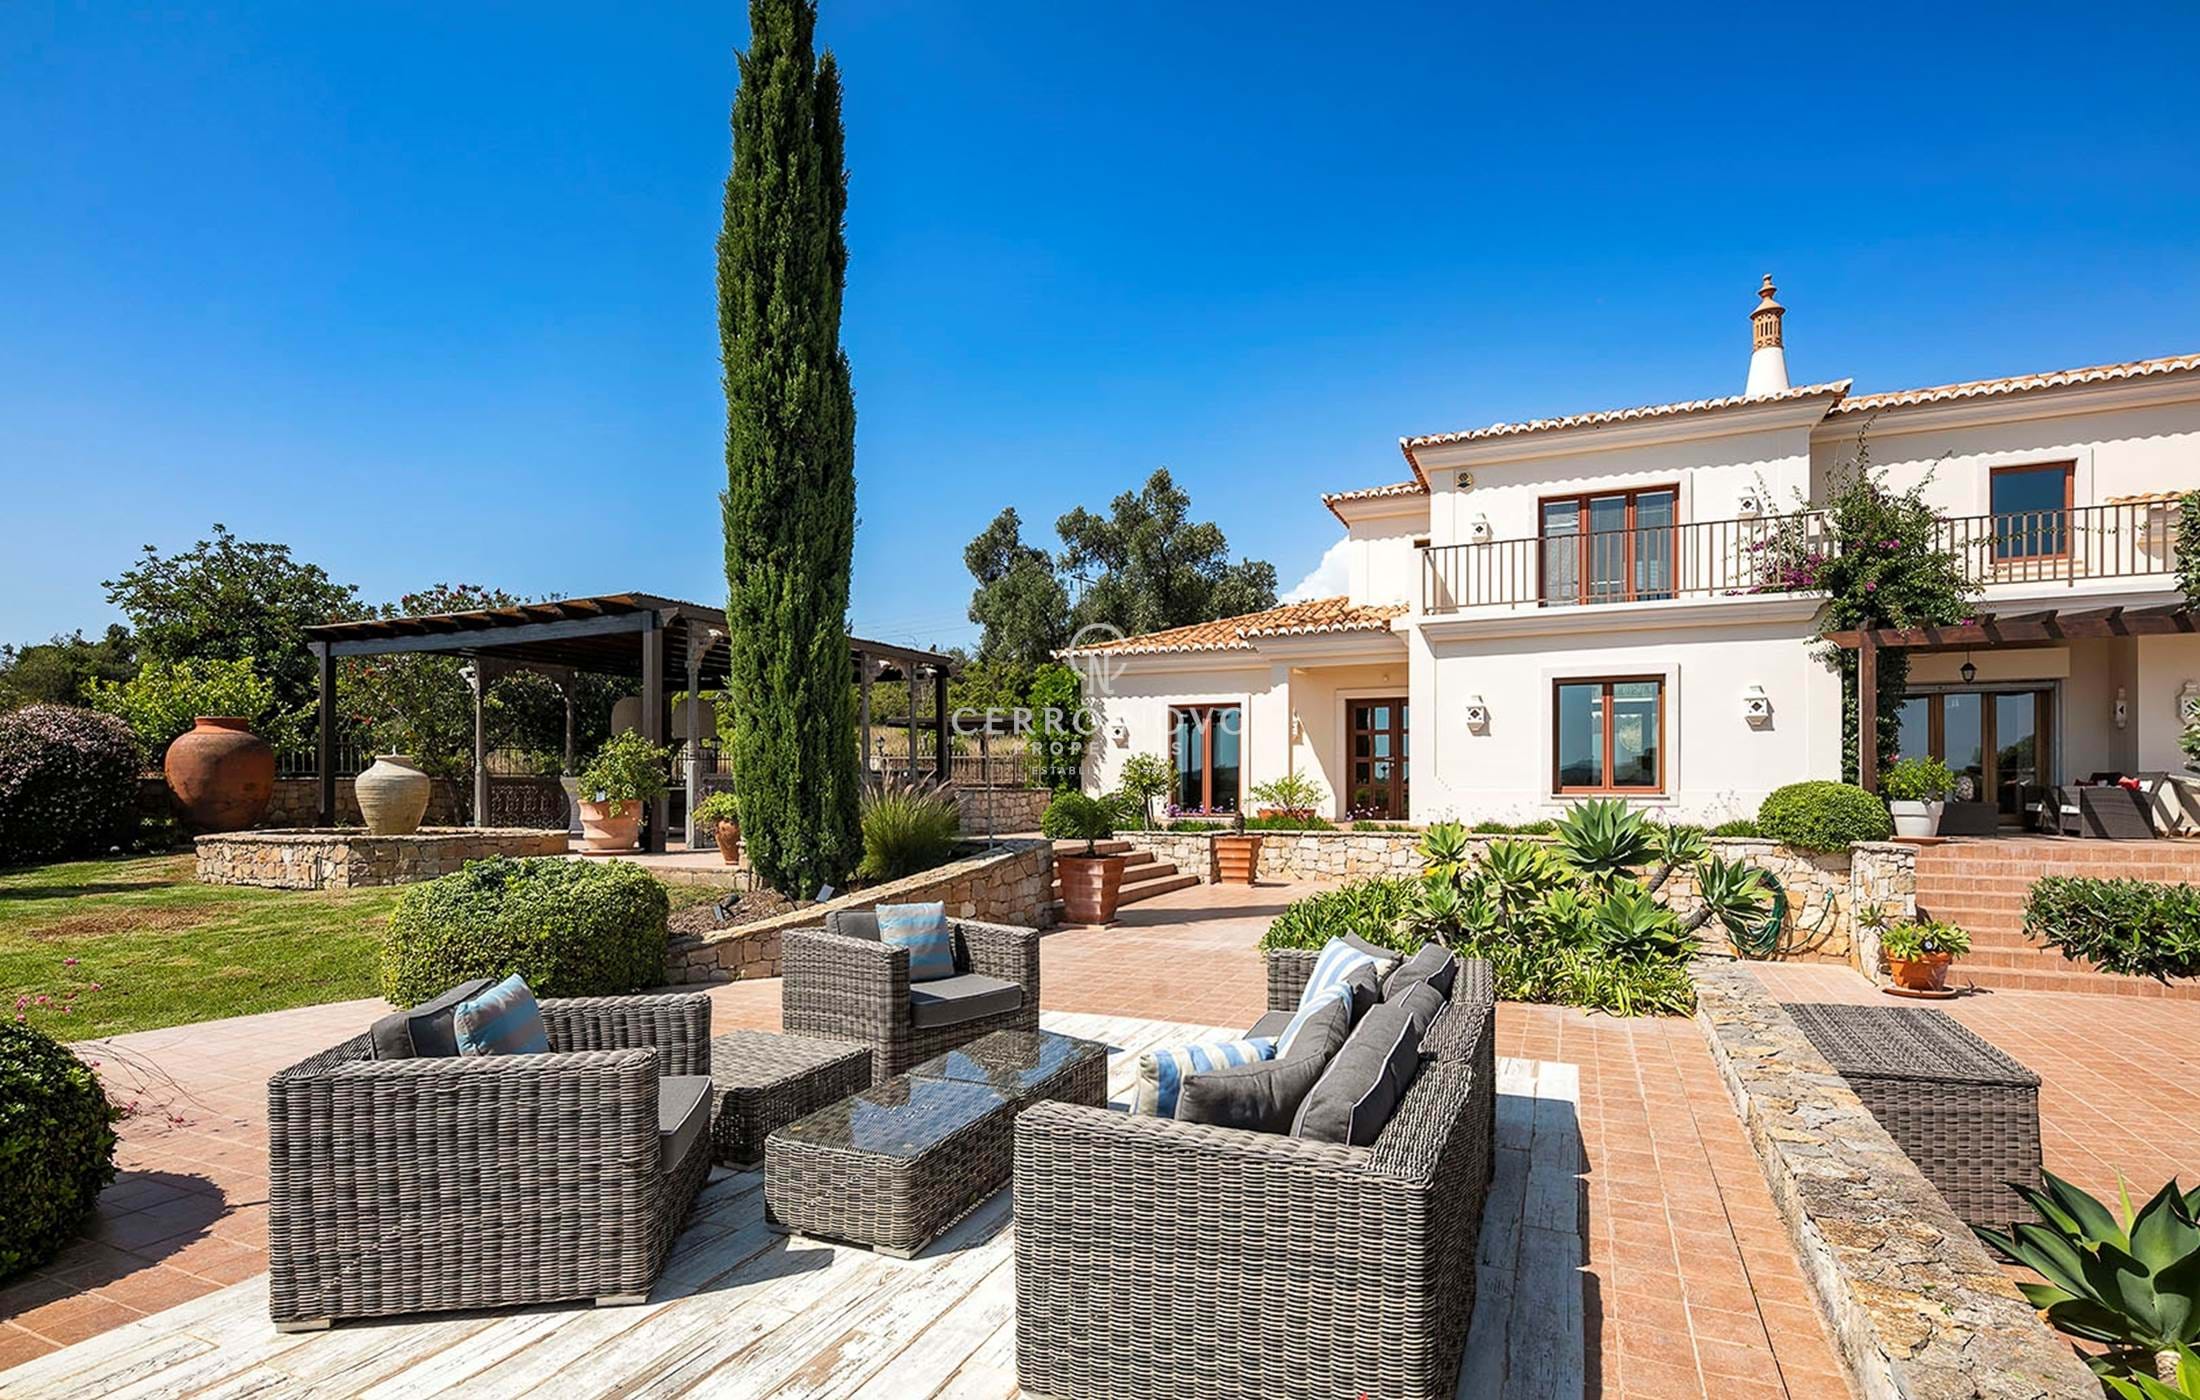 Stylish 4-bedroom villa situated on an elevated plot near Loulé